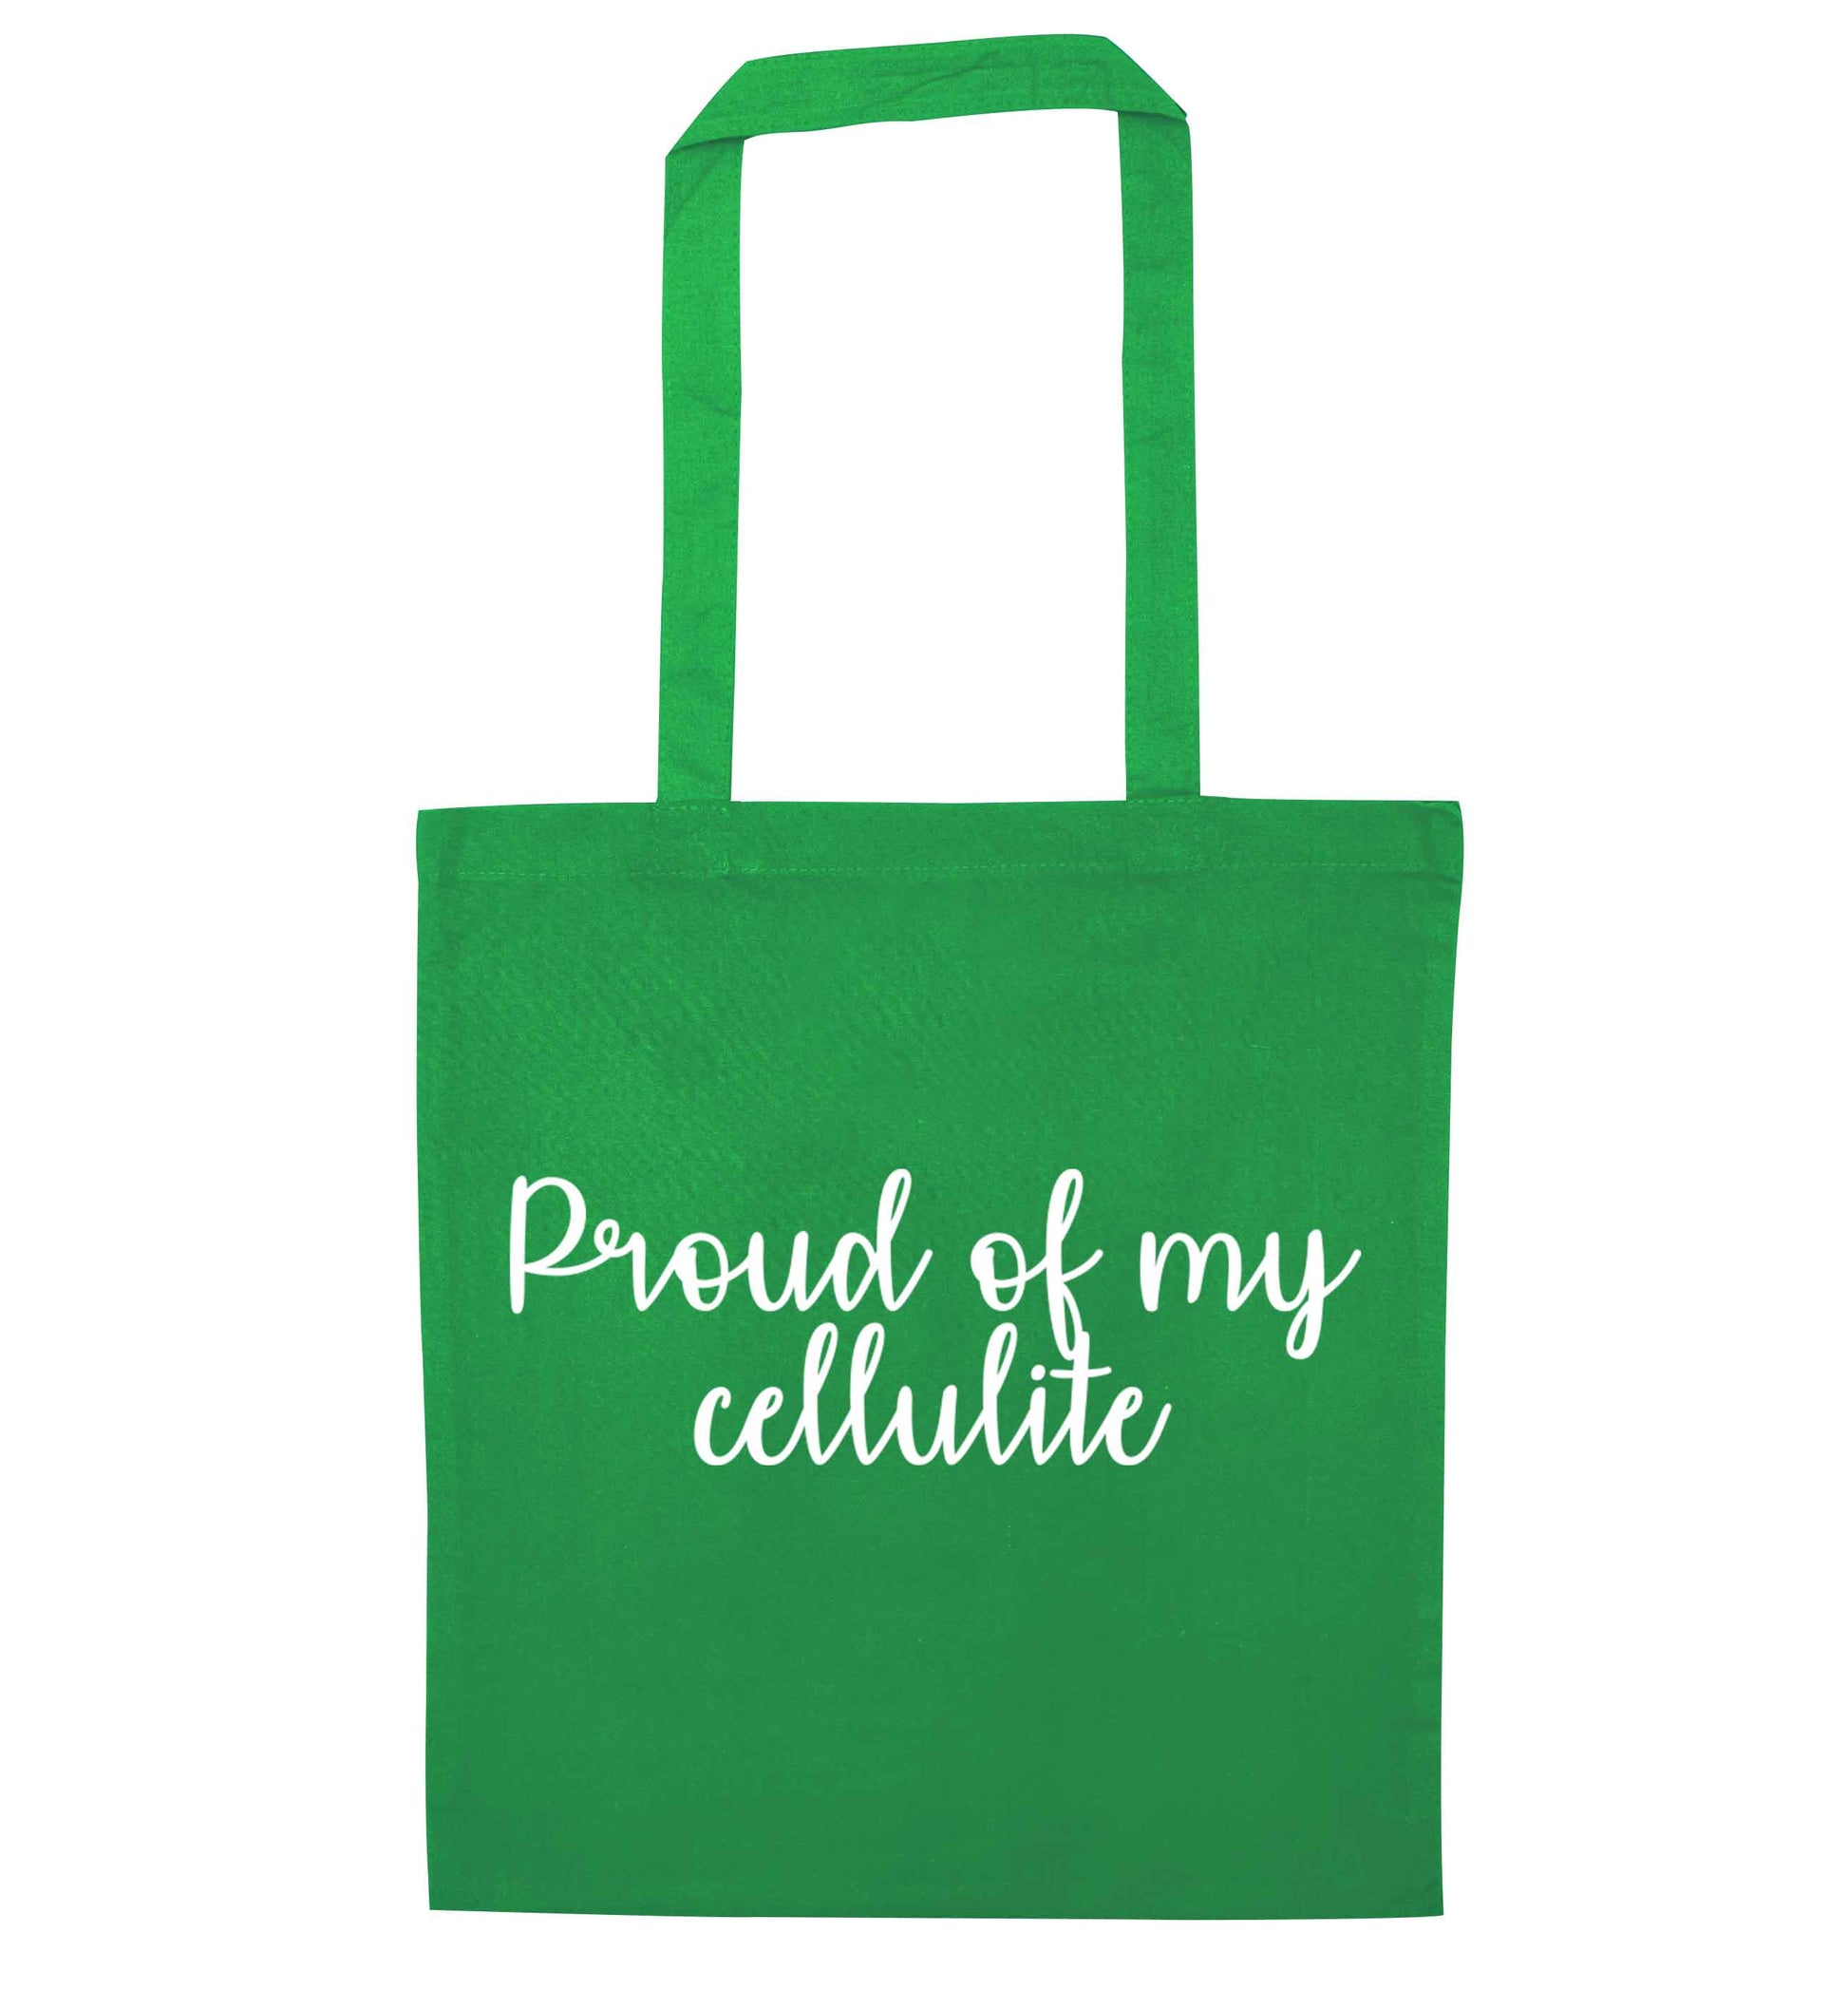 Proud of my cellulite green tote bag